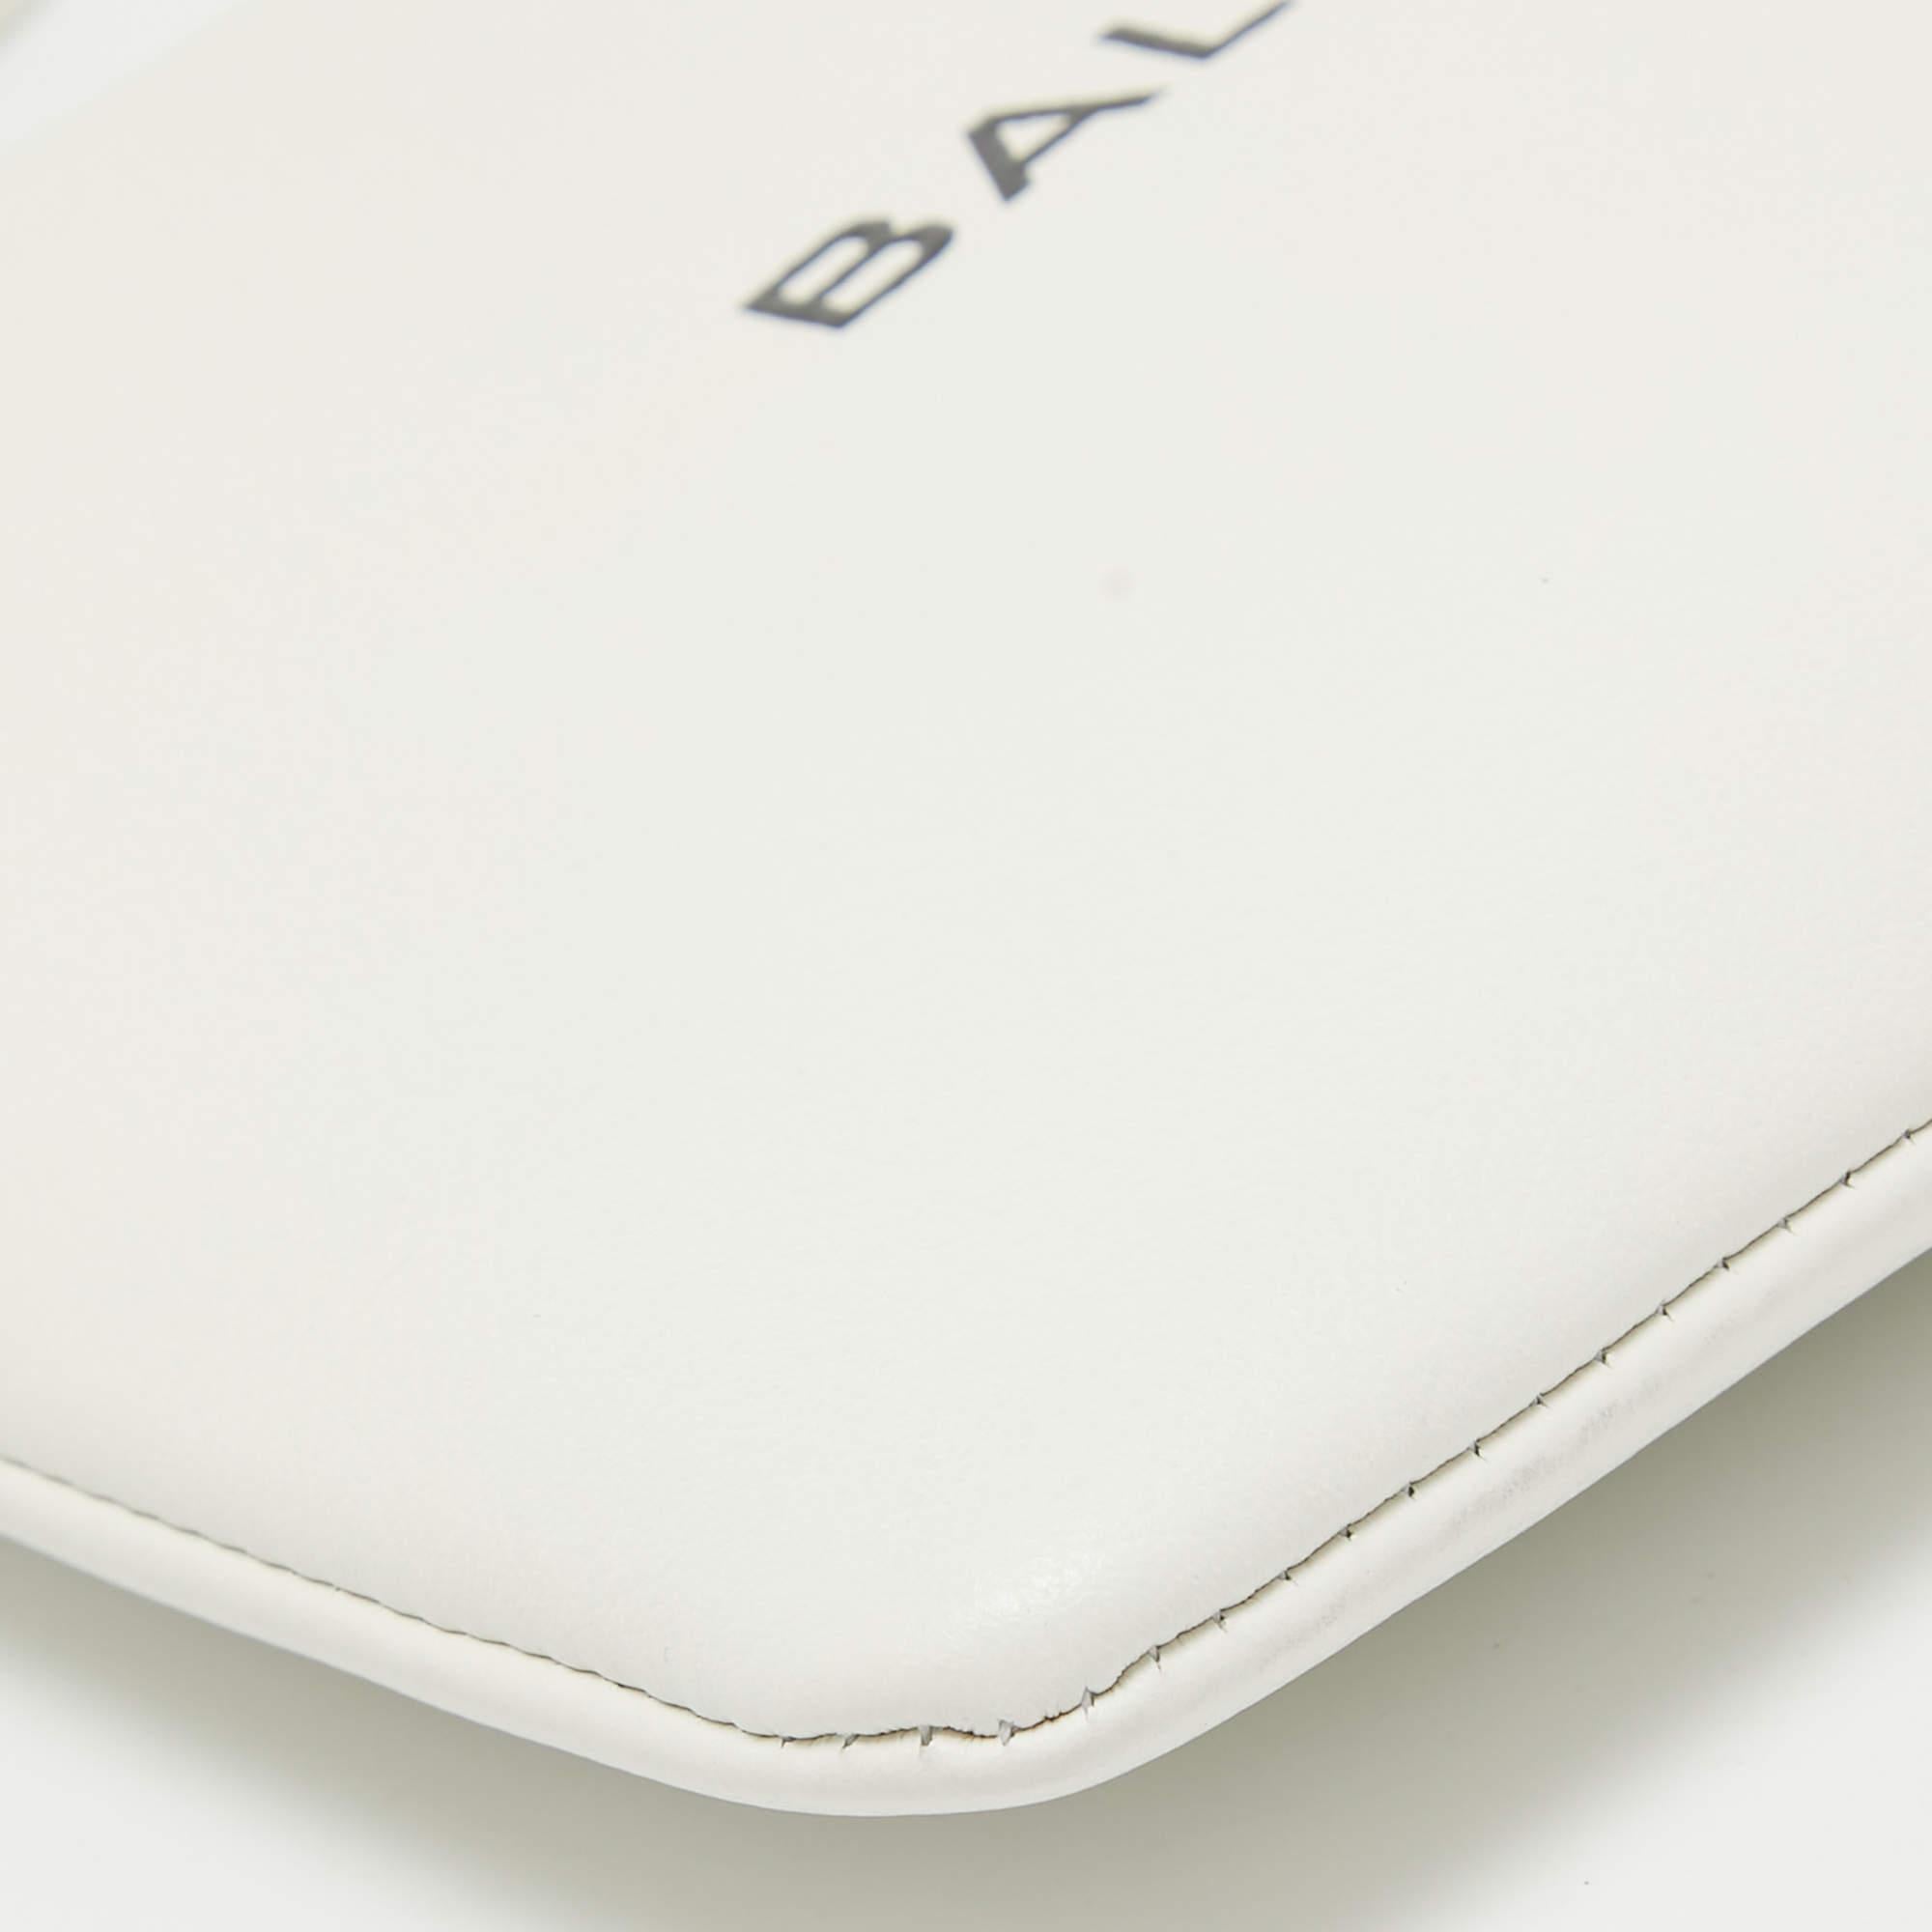 Balenciaga White Leather Zip Pouch For Sale 5